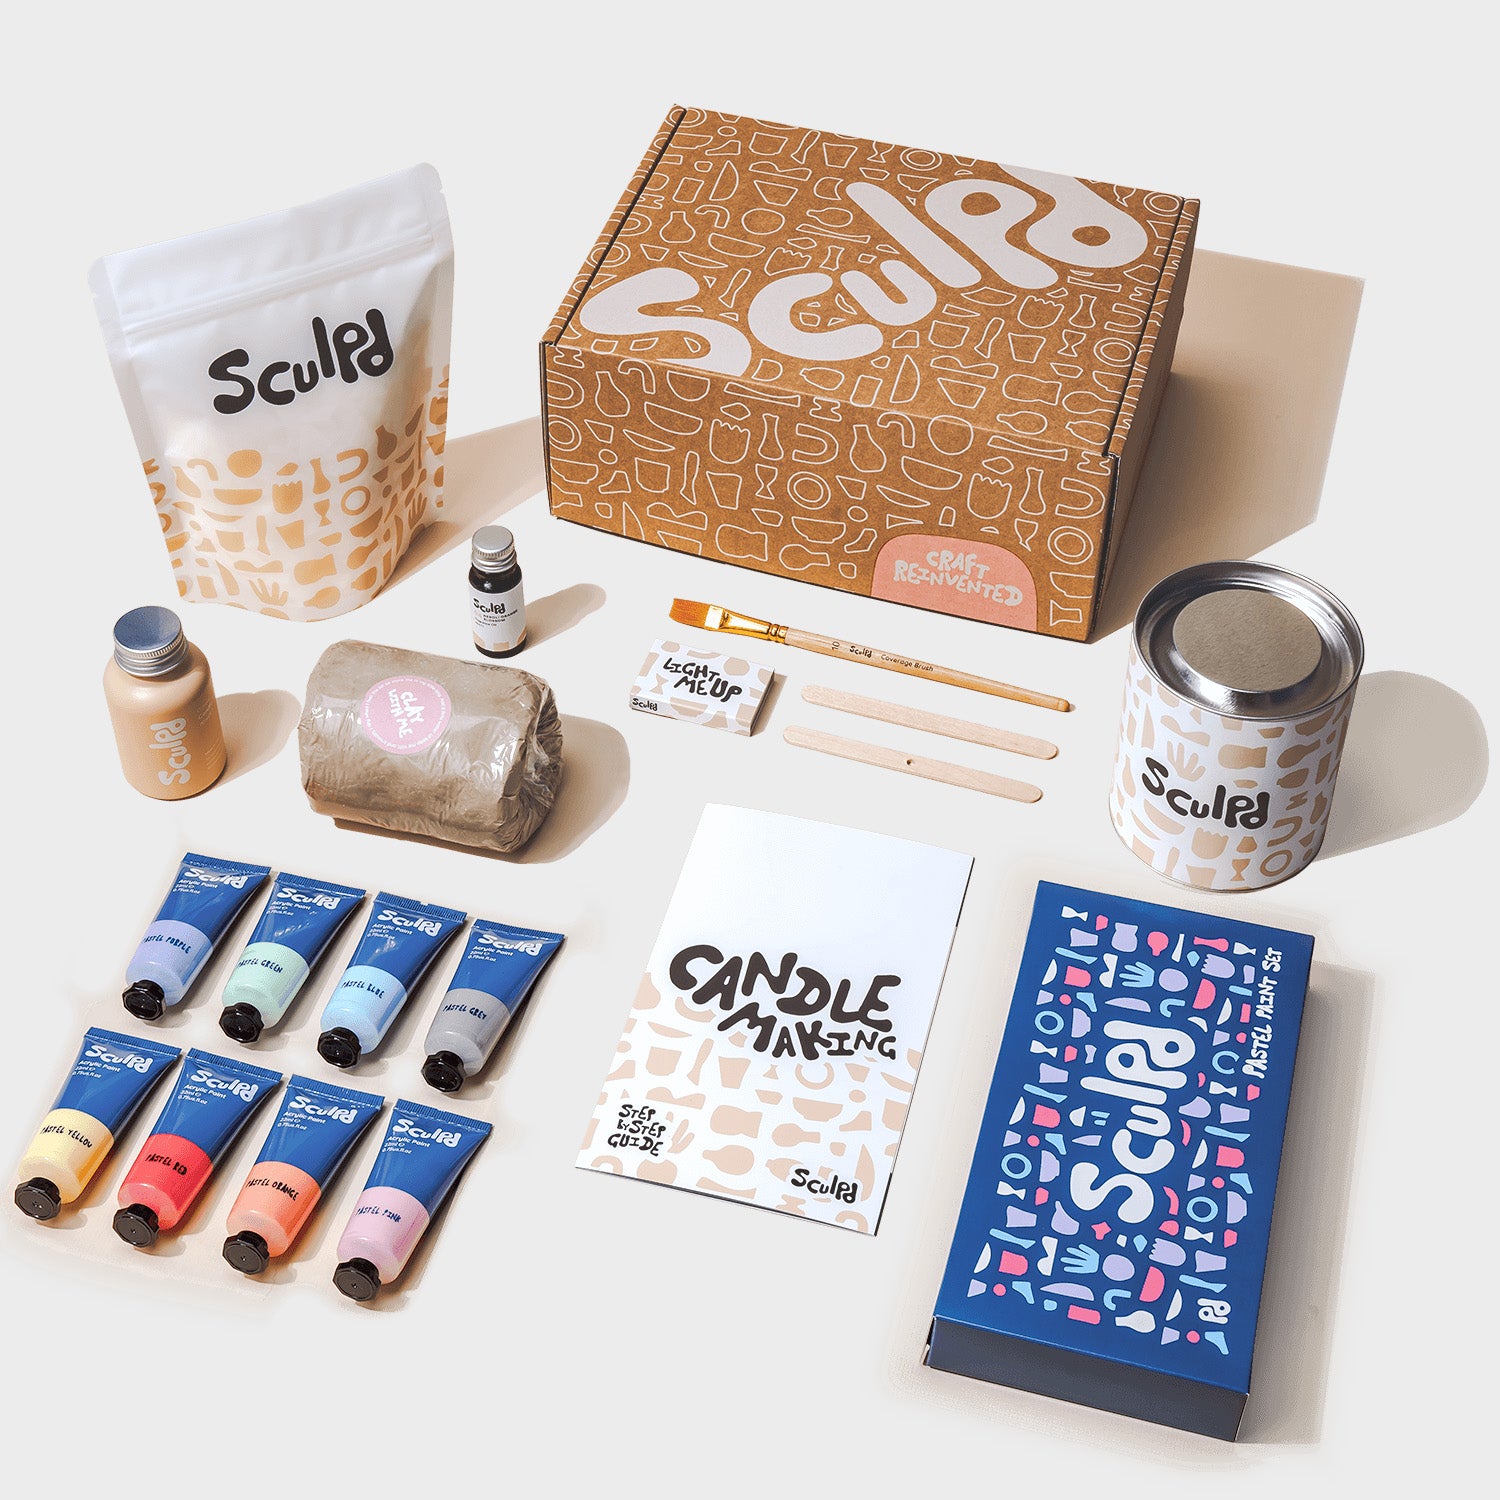 At Home Pottery Sculpting Kit with Pastel Paint by Sculpd